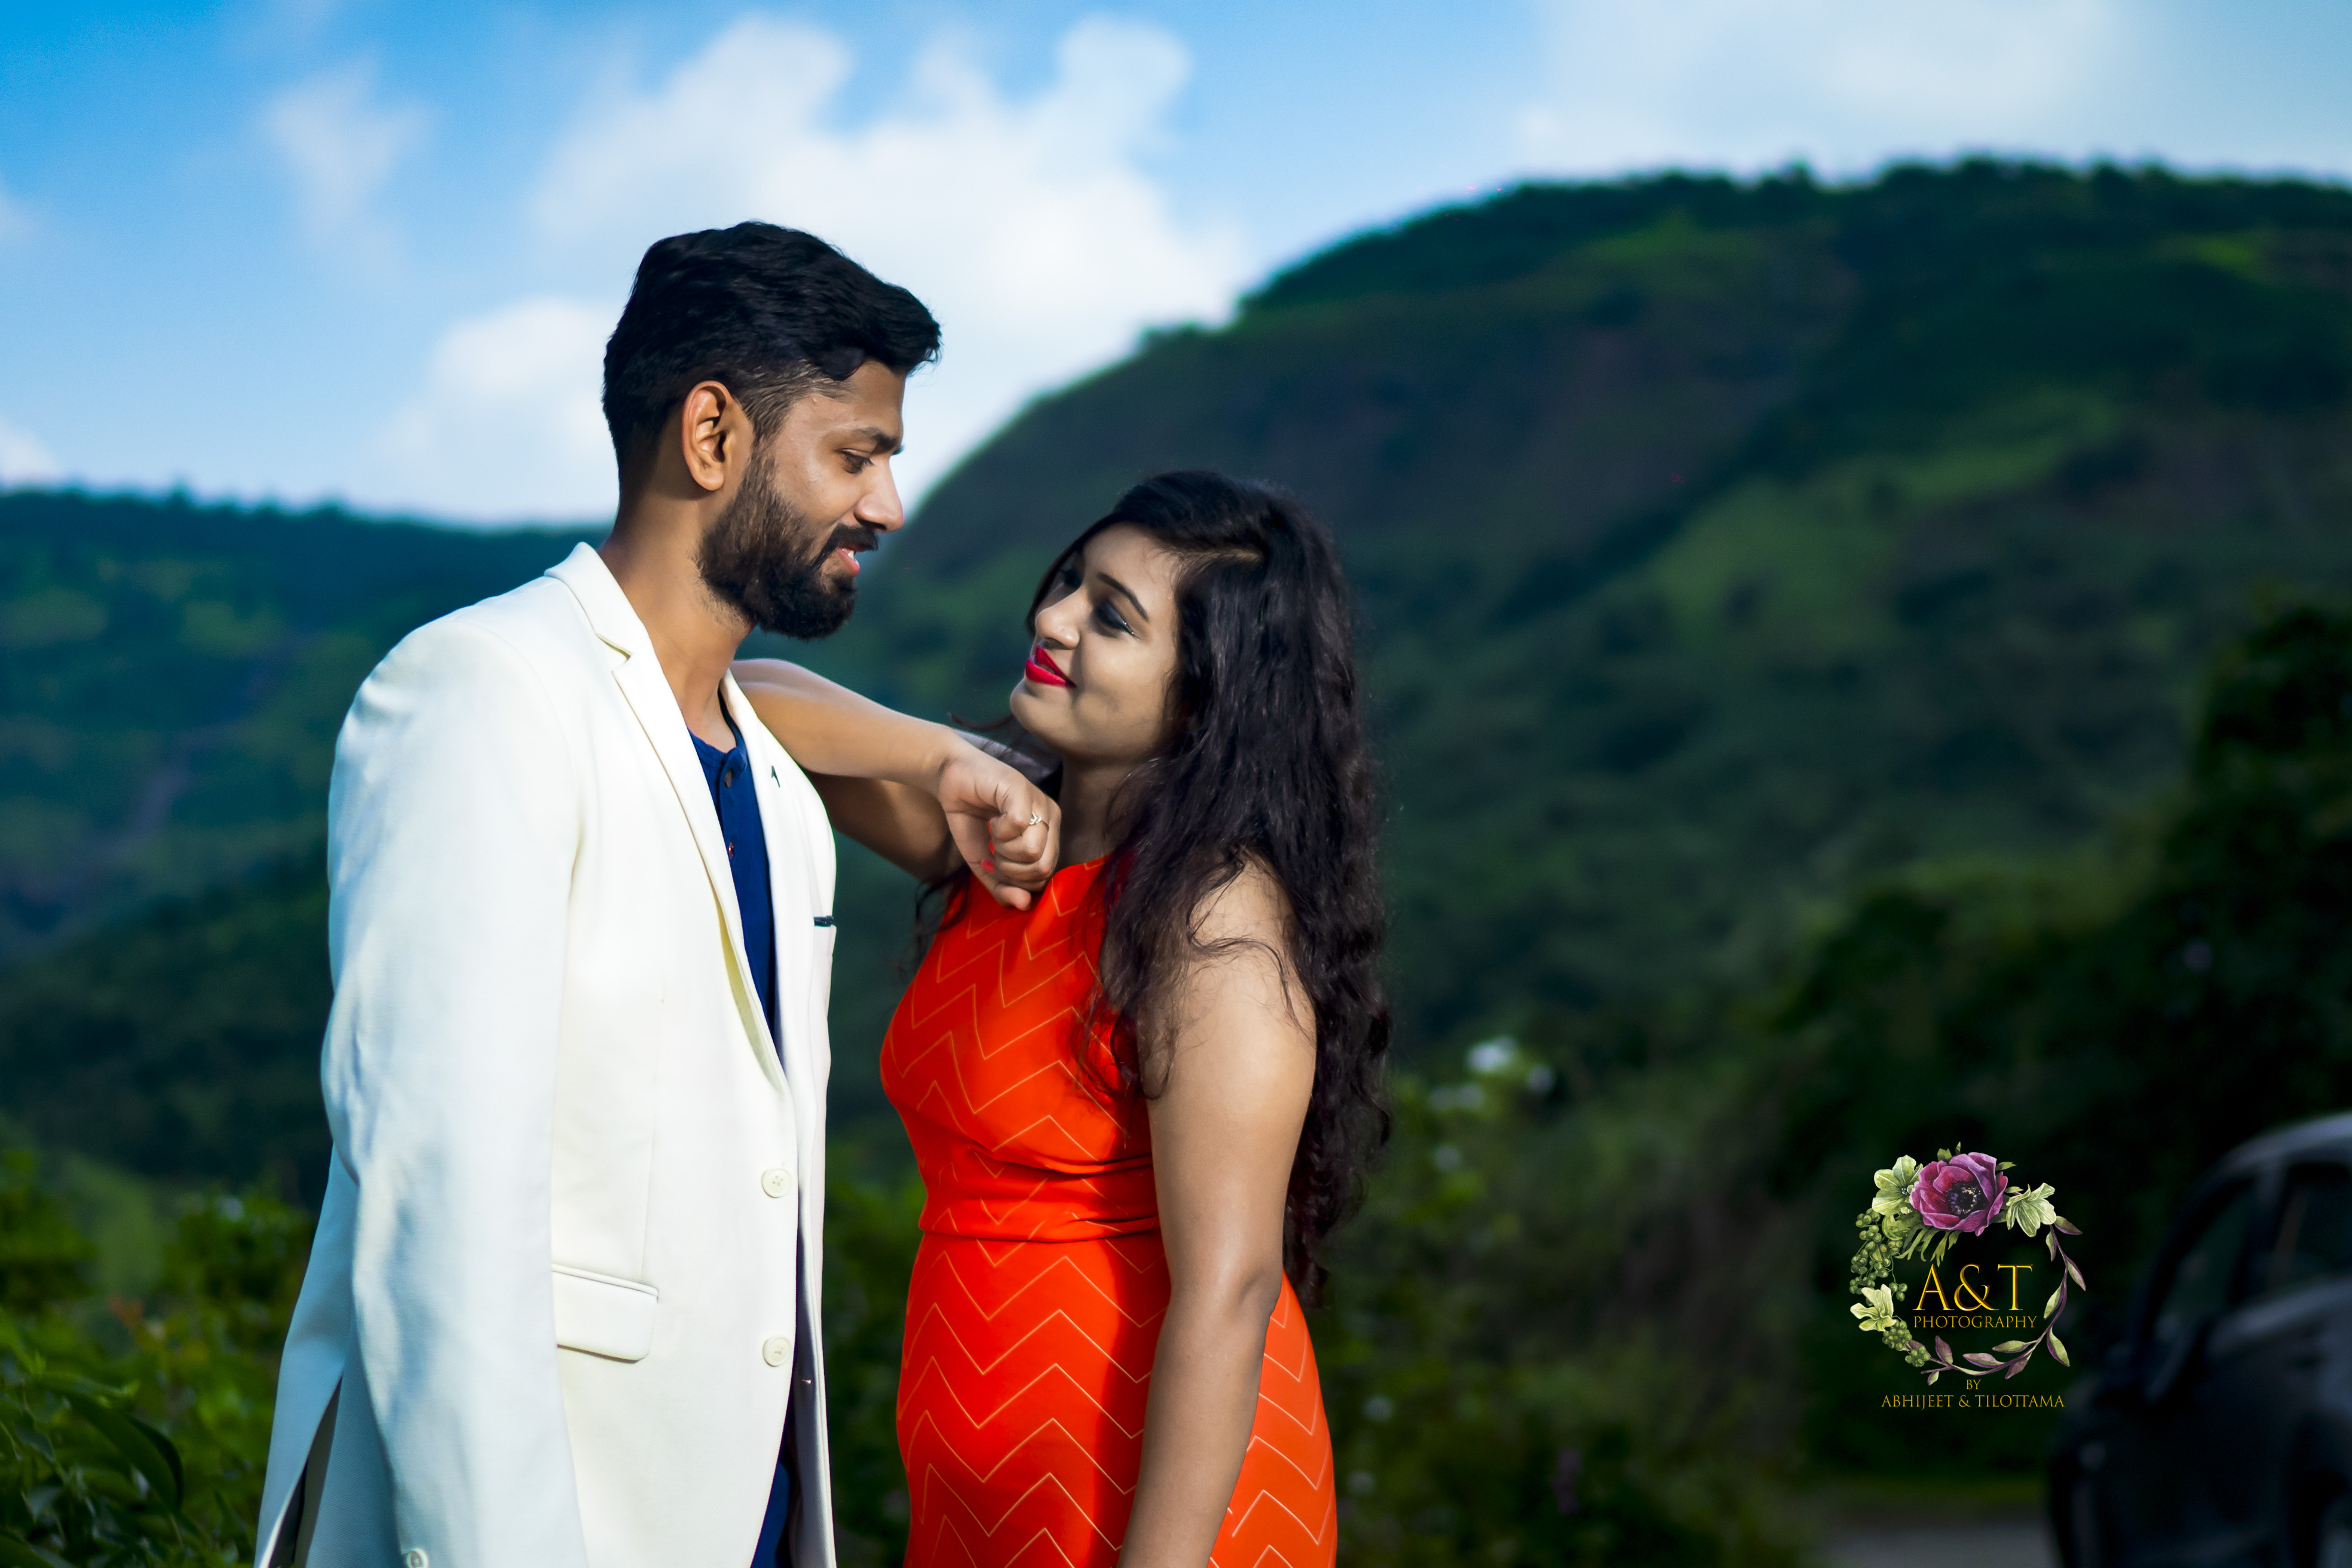 When They were lost in each other's unconditional love during their Pre-Wedding Photoshoot in Lonawala.